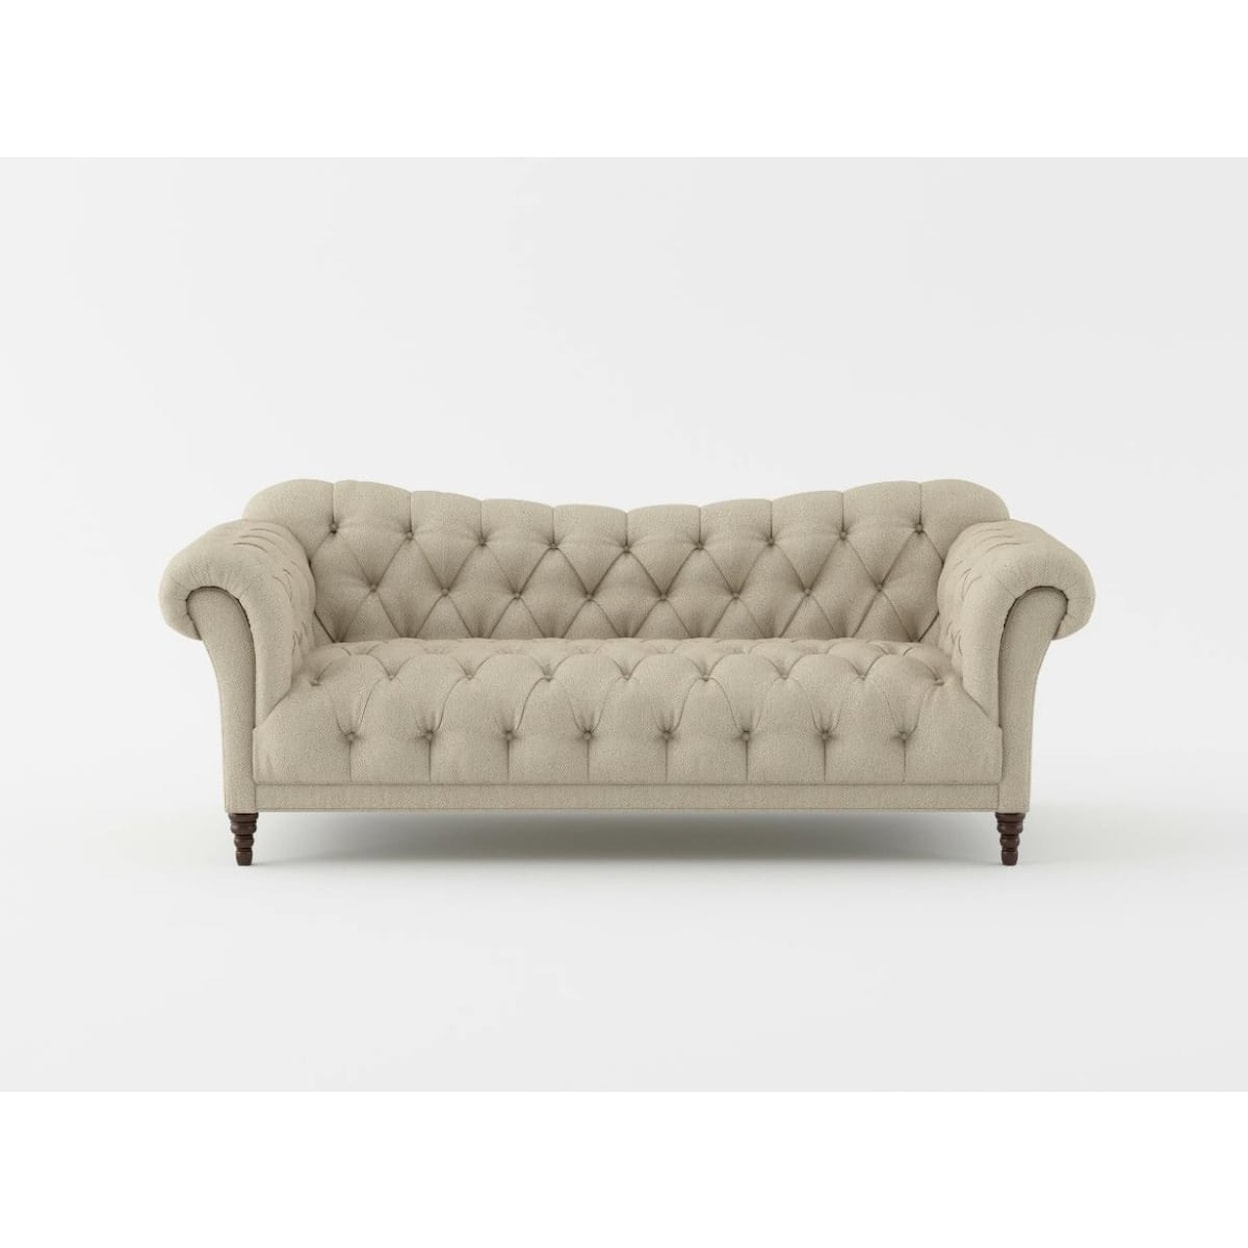 Homelegance Furniture Claire St. Sofa